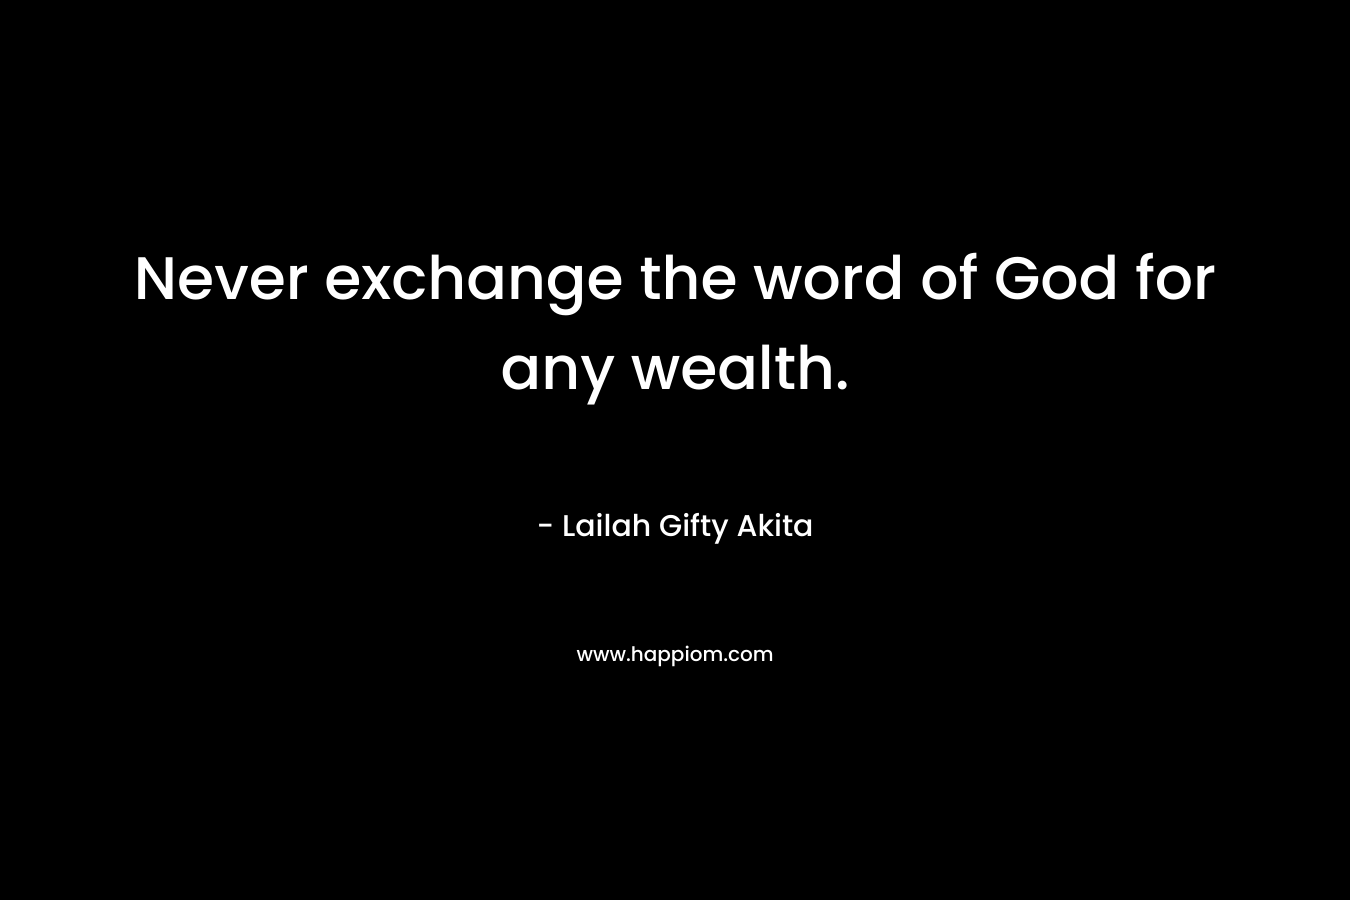 Never exchange the word of God for any wealth.